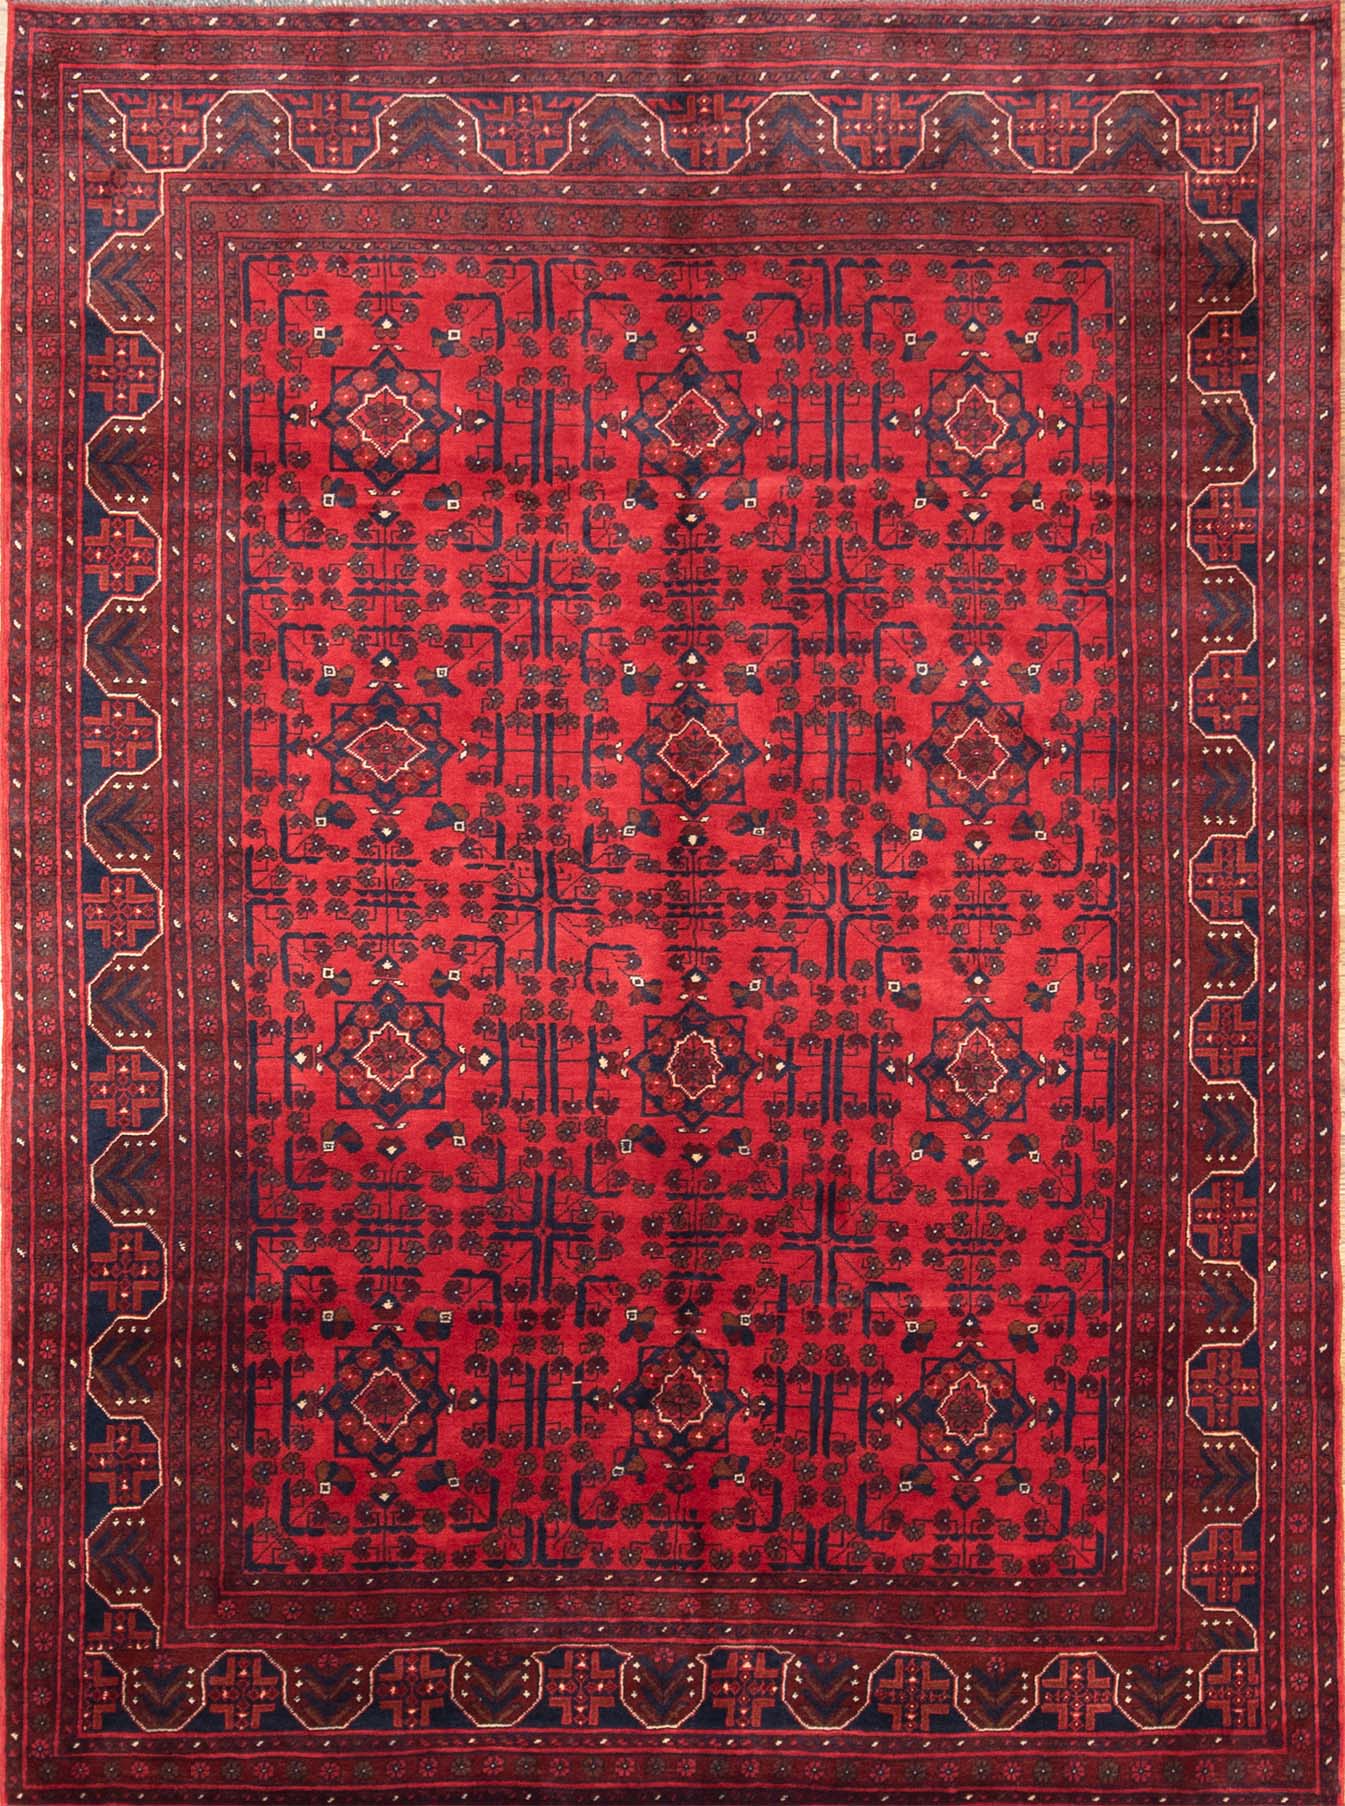 Living room rug. Handwoven traditional rug from Afghanistan. Rug size 6.6x9.7.